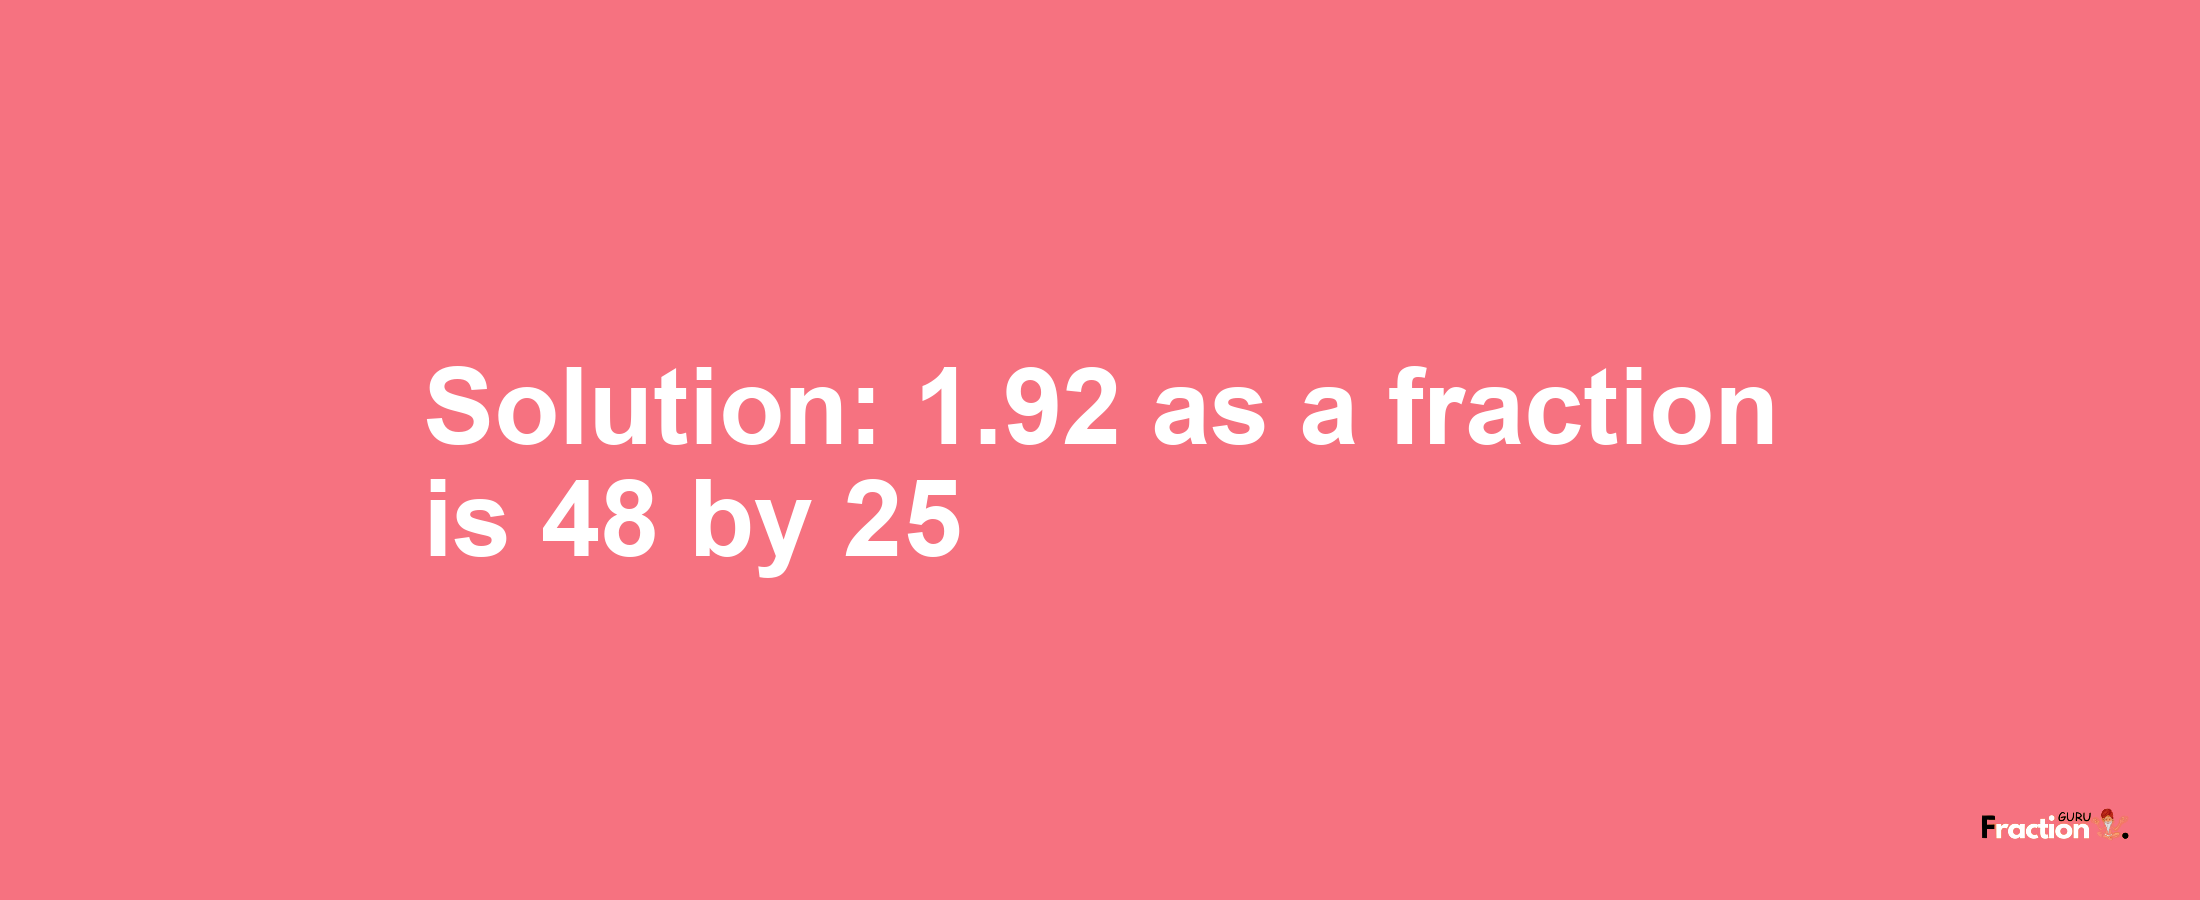 Solution:1.92 as a fraction is 48/25